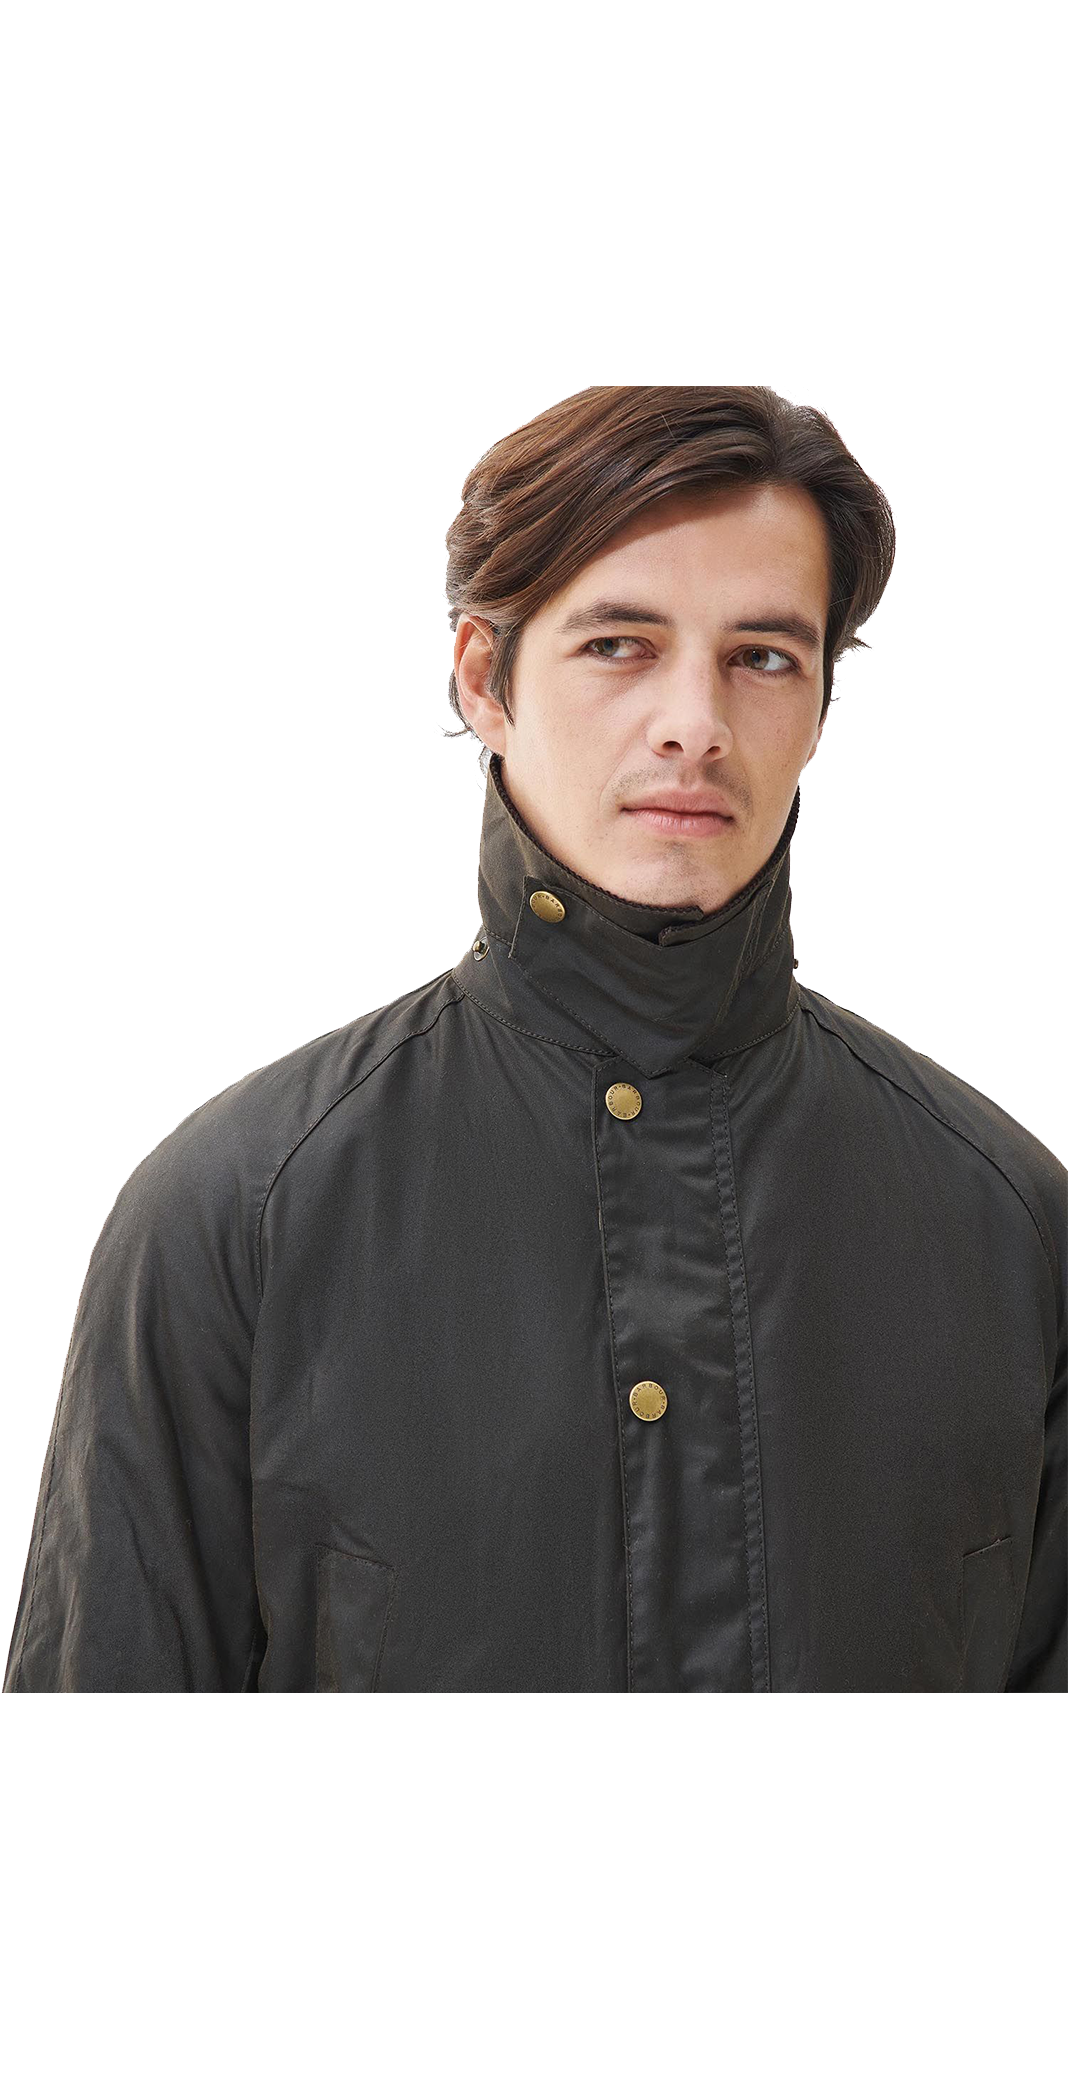 Barbour Ashby Giaccone Cerato